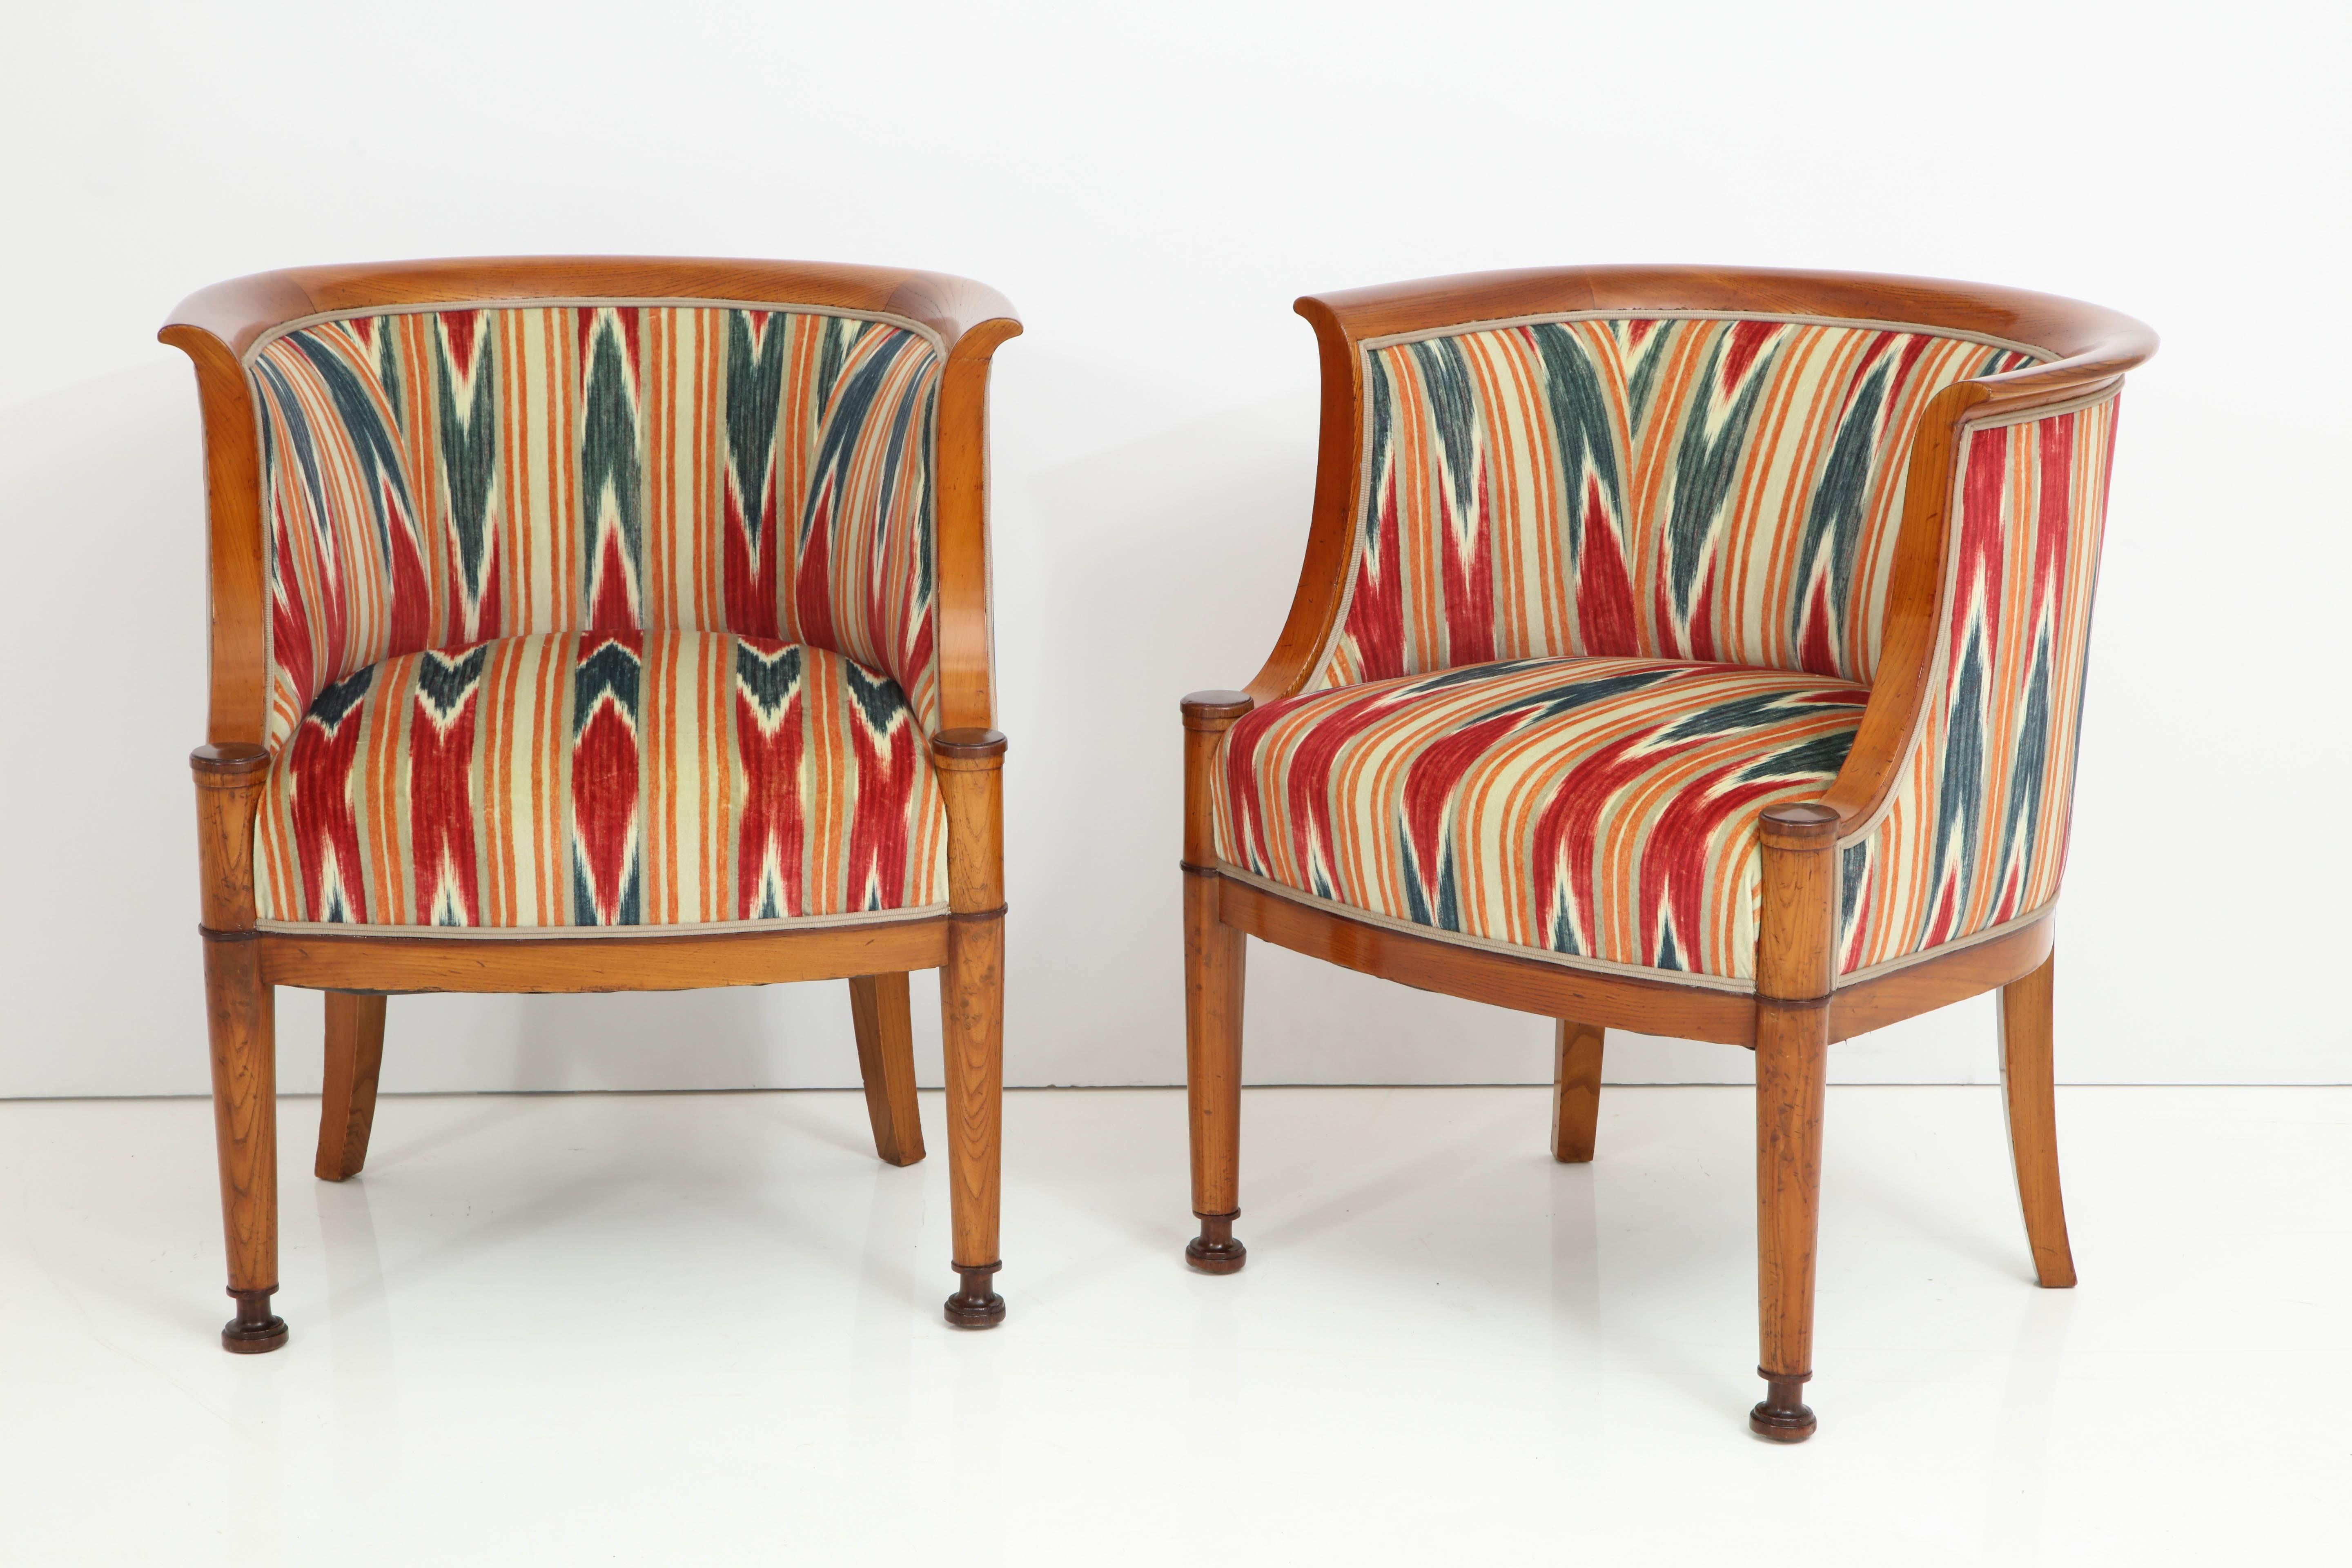 A pair of Danish polished elmwood and dark stained barrel back armchairs, circa 1910, each with a hoop backrest, scrolled supports raised on turned and tapered legs with dark stained banding and feet.